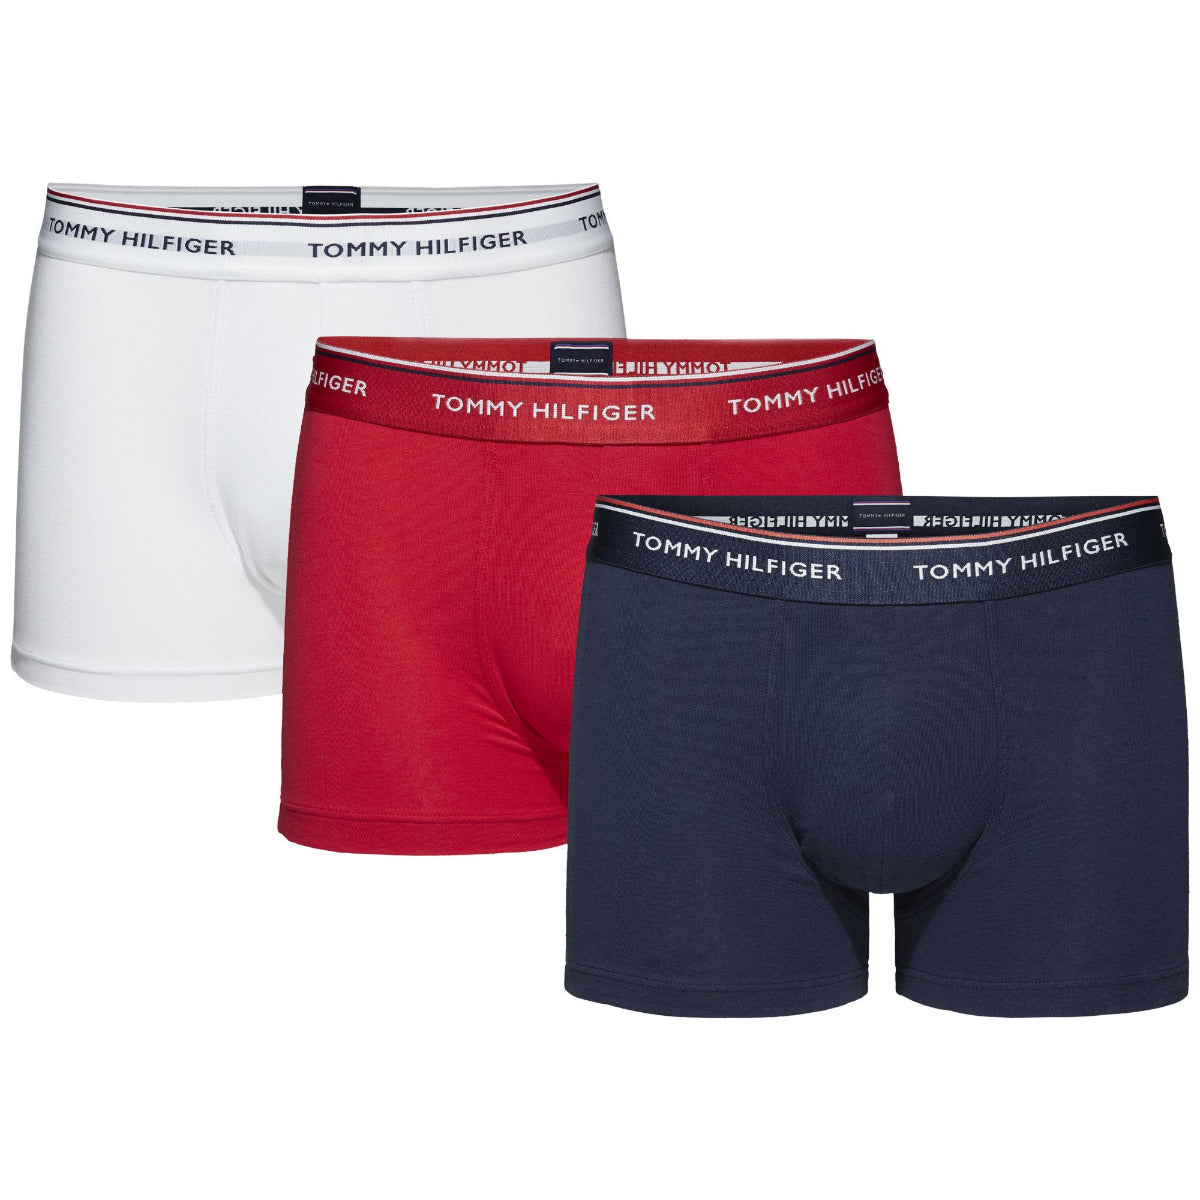 Exclusive 3-Pack Organic Cotton Trunks White/tango red/ peacoat